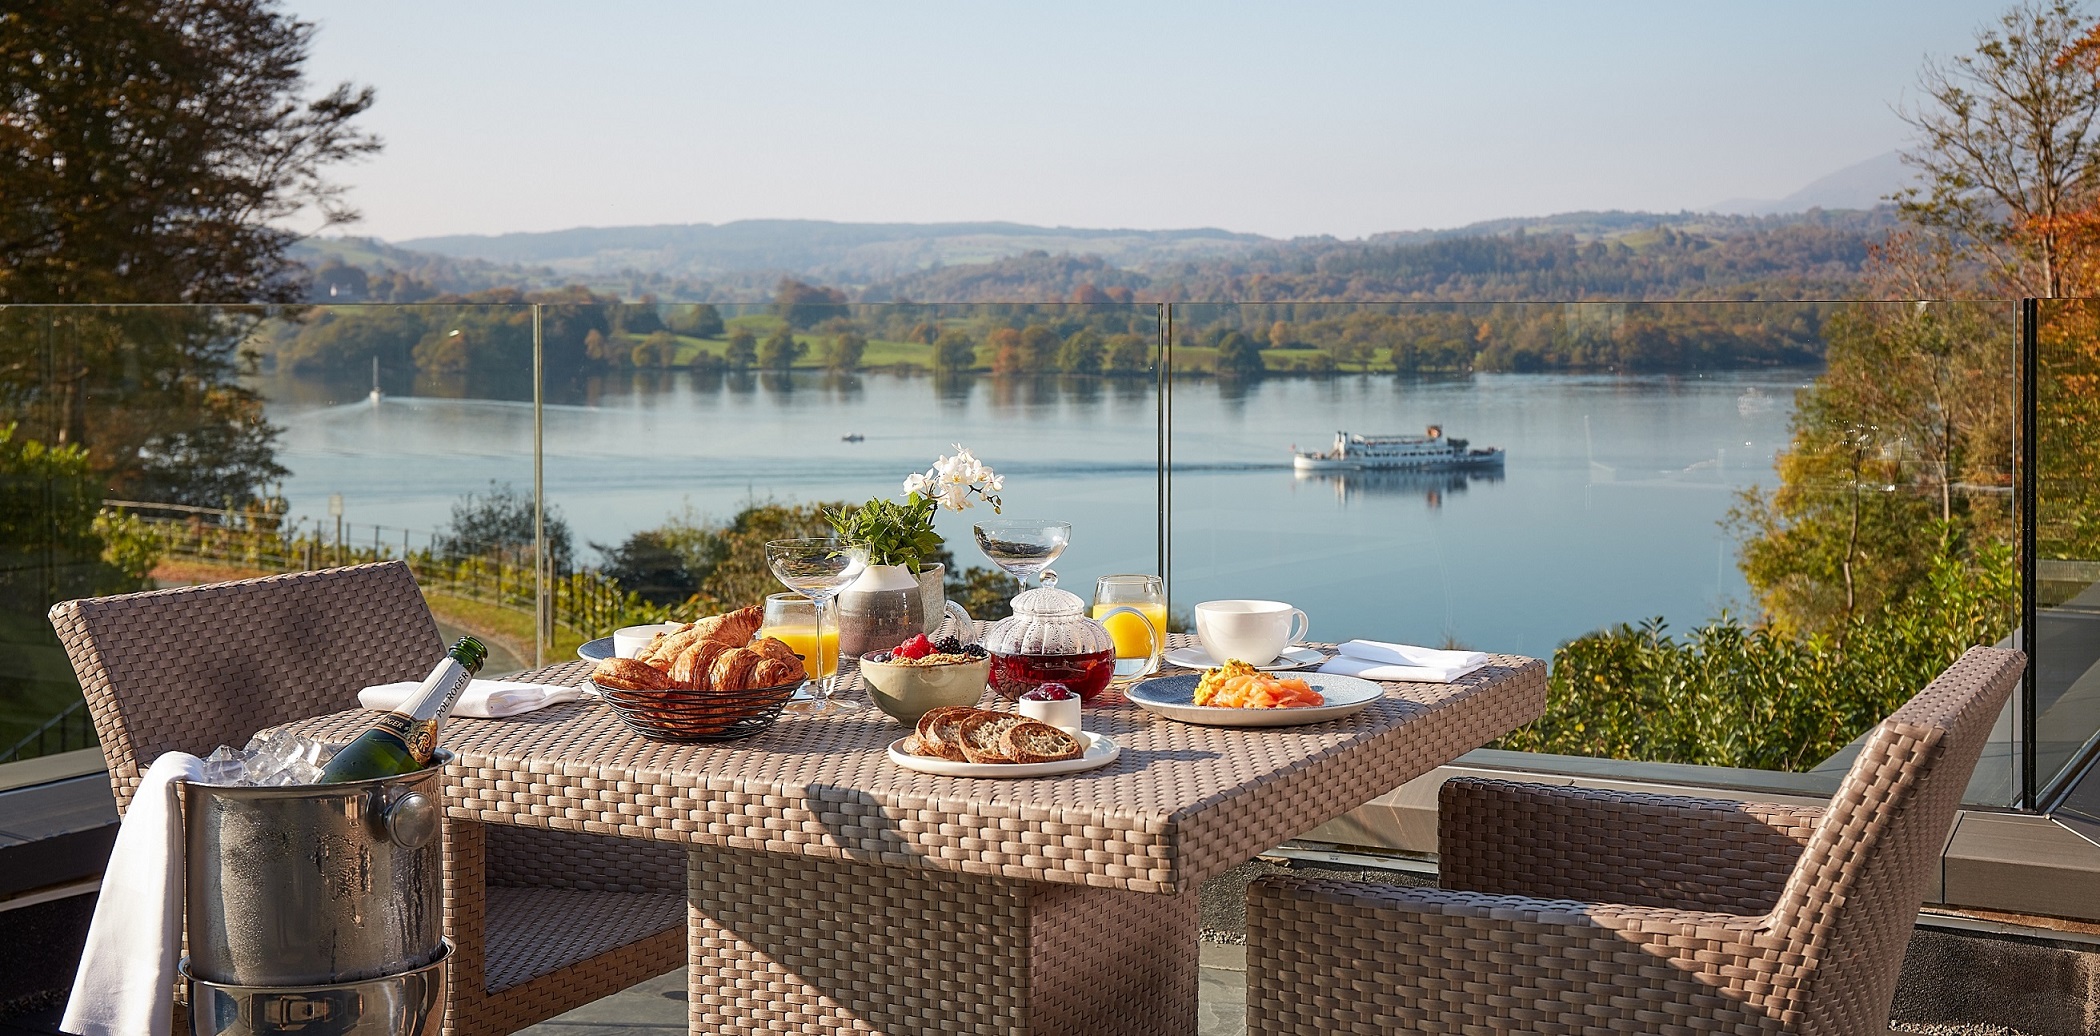 Lake view terrace breakfast - The Samling Luxury Country Hotel in the